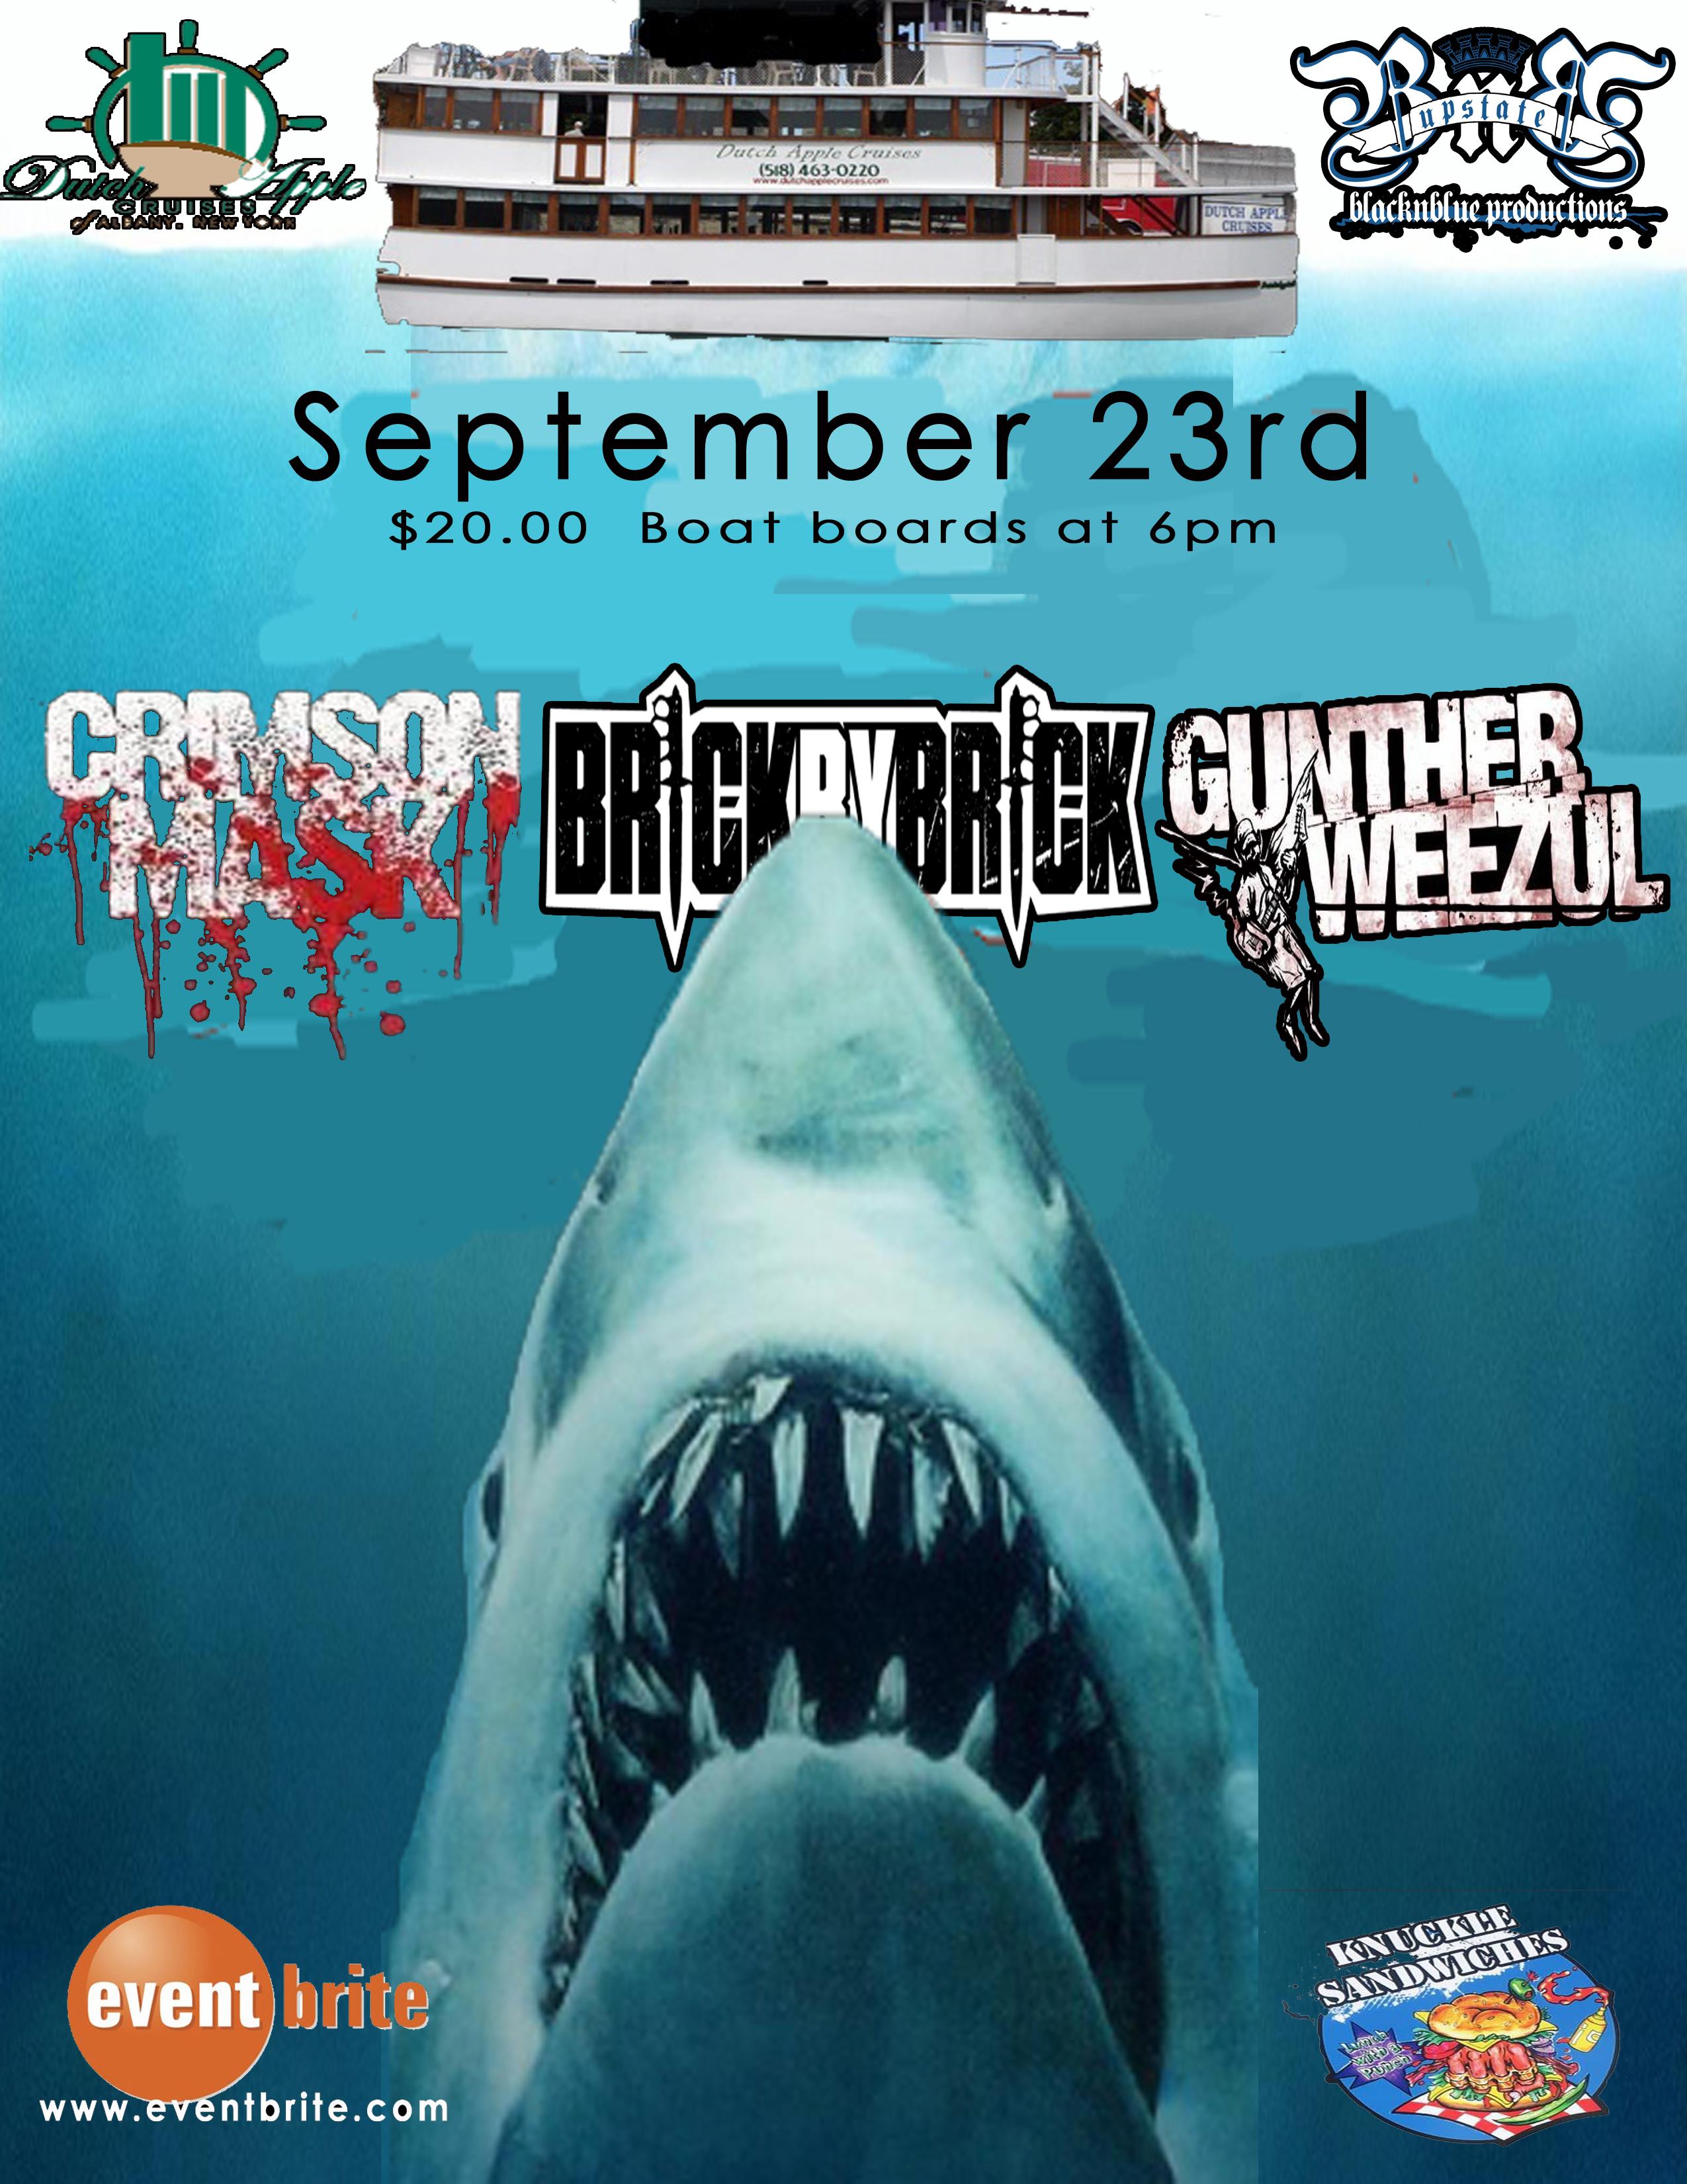 Metal Boat Cruise with Crimson Mask, Brick By Brick, Gunther Weezul